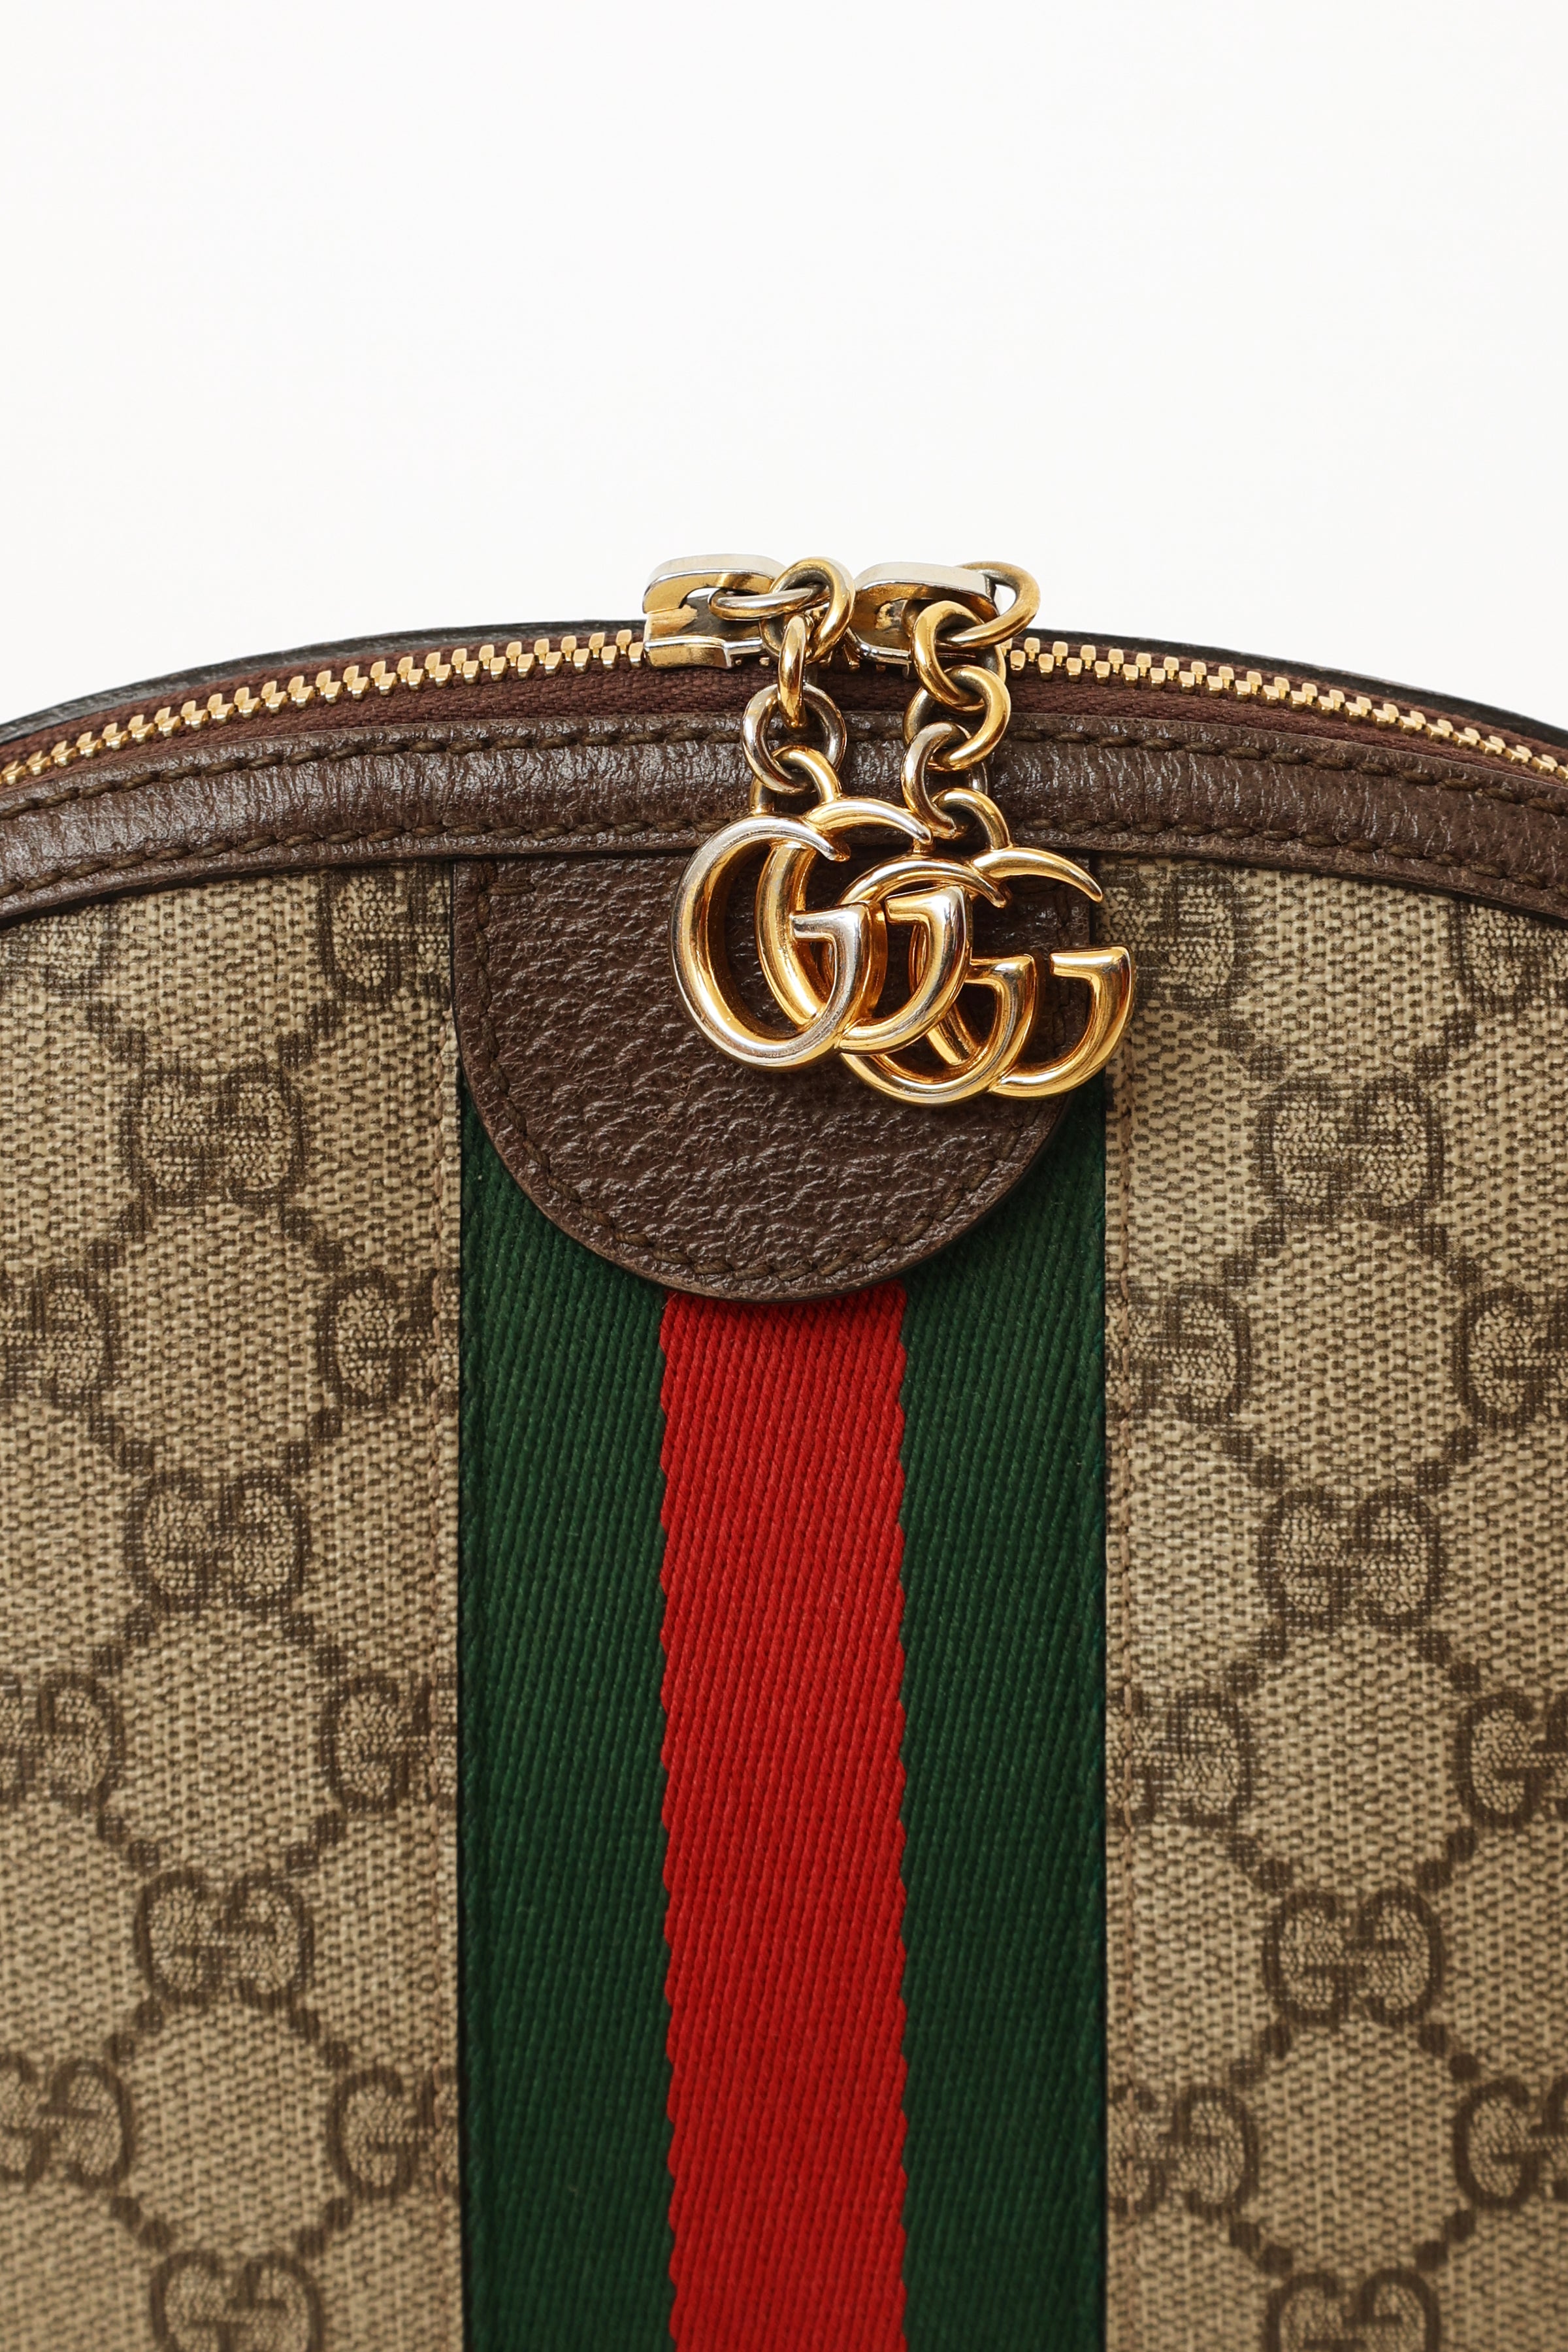 GUCCI #OPHIDIA GG SMALL SHOULDER BAG 980 #WOMEN #SS19 For more